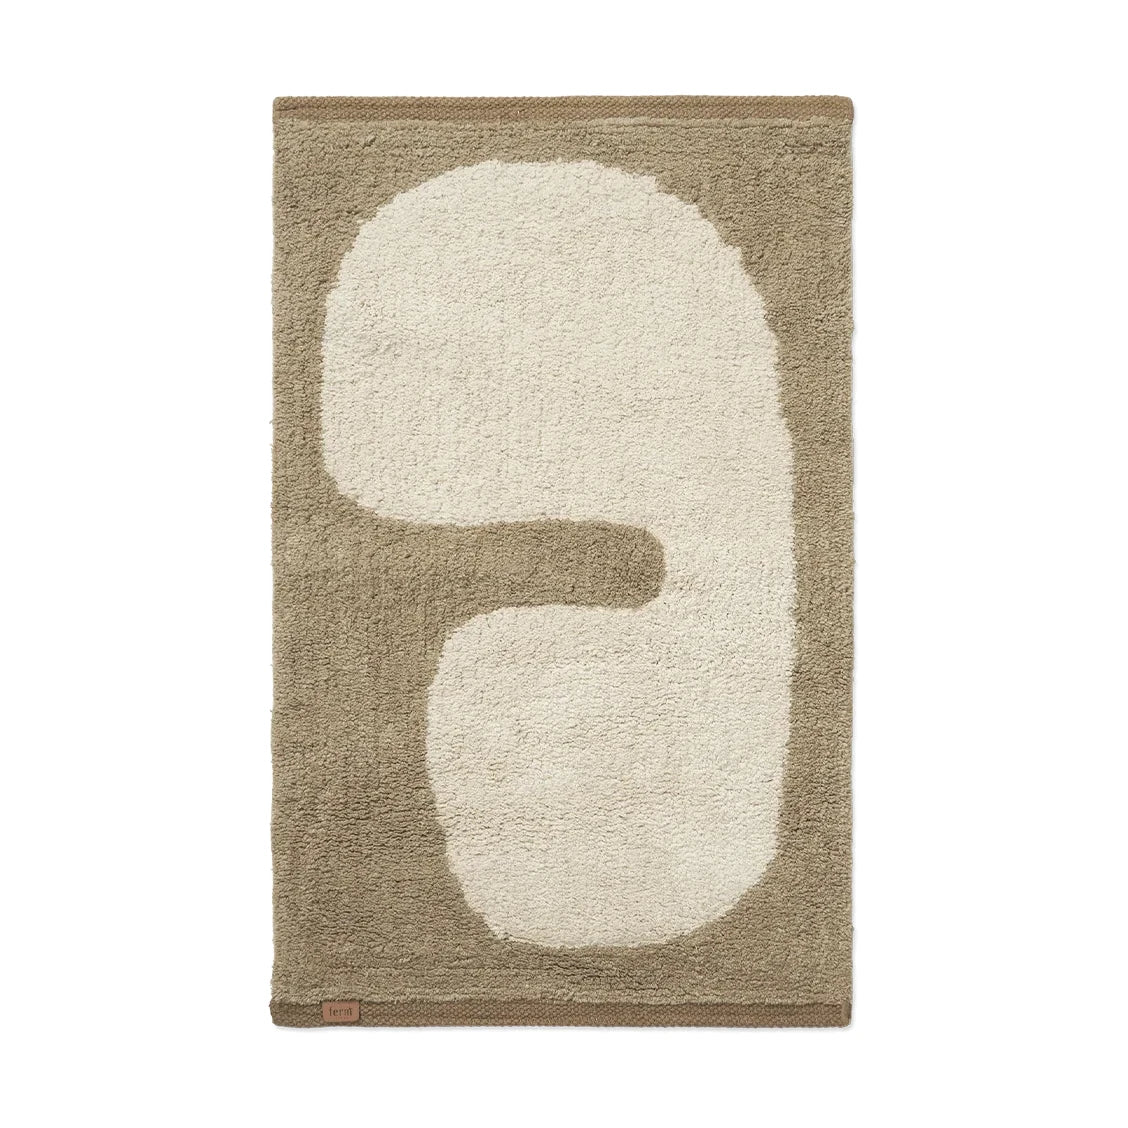 Lay Washable Mat | Dark Taupe & Off White | by ferm Living - Lifestory